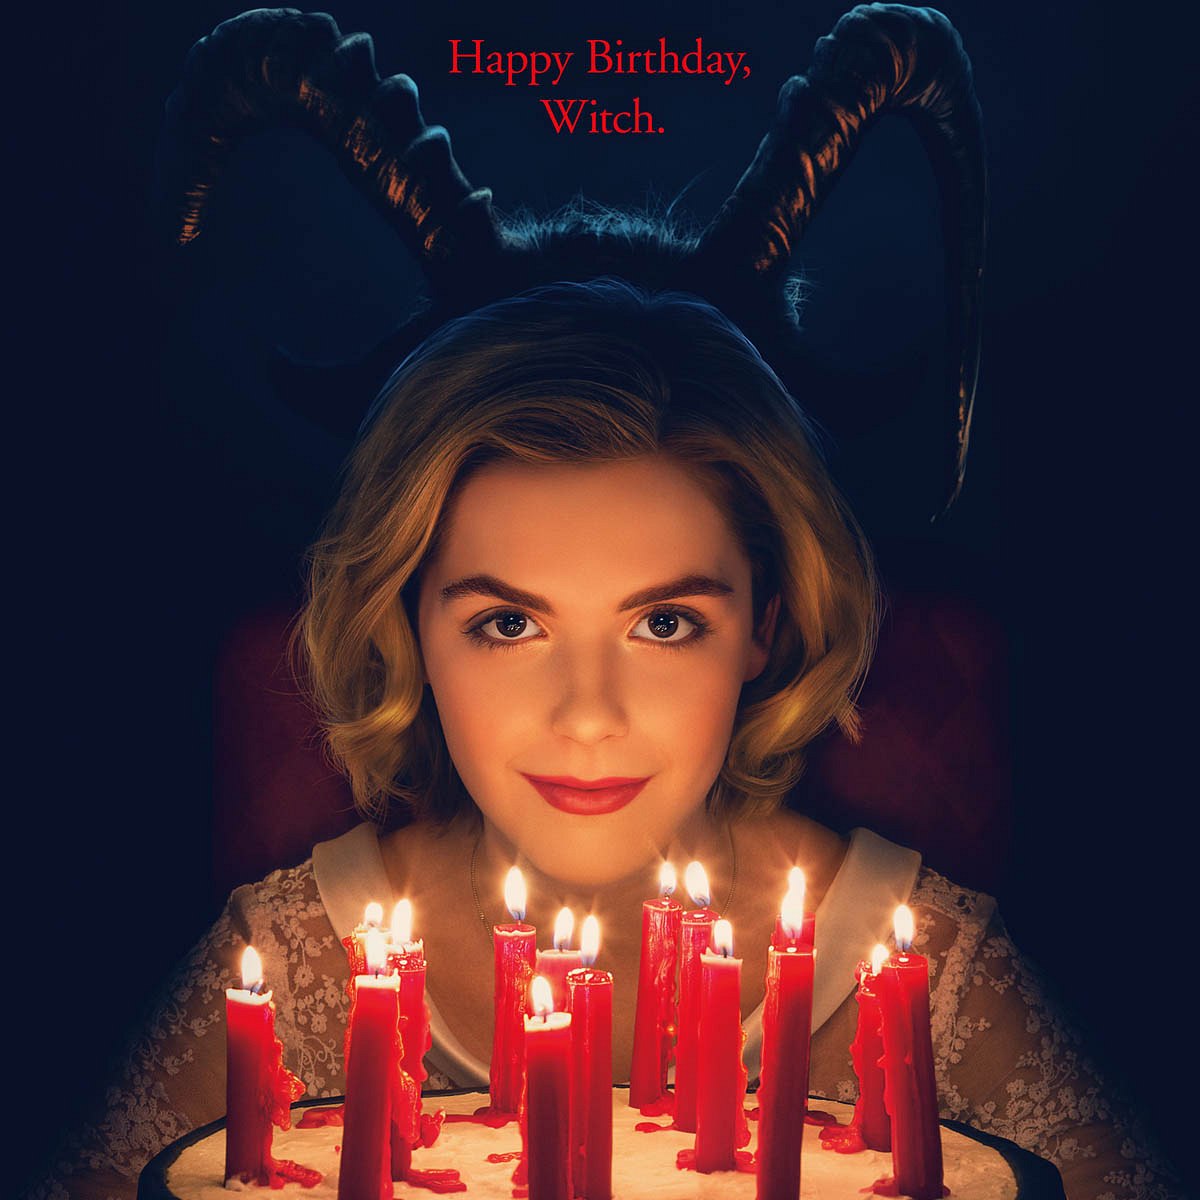 “The Vampire Diaries”: 10 Serien für Mystery-Fans - The Chiling Adventures of Sabrina